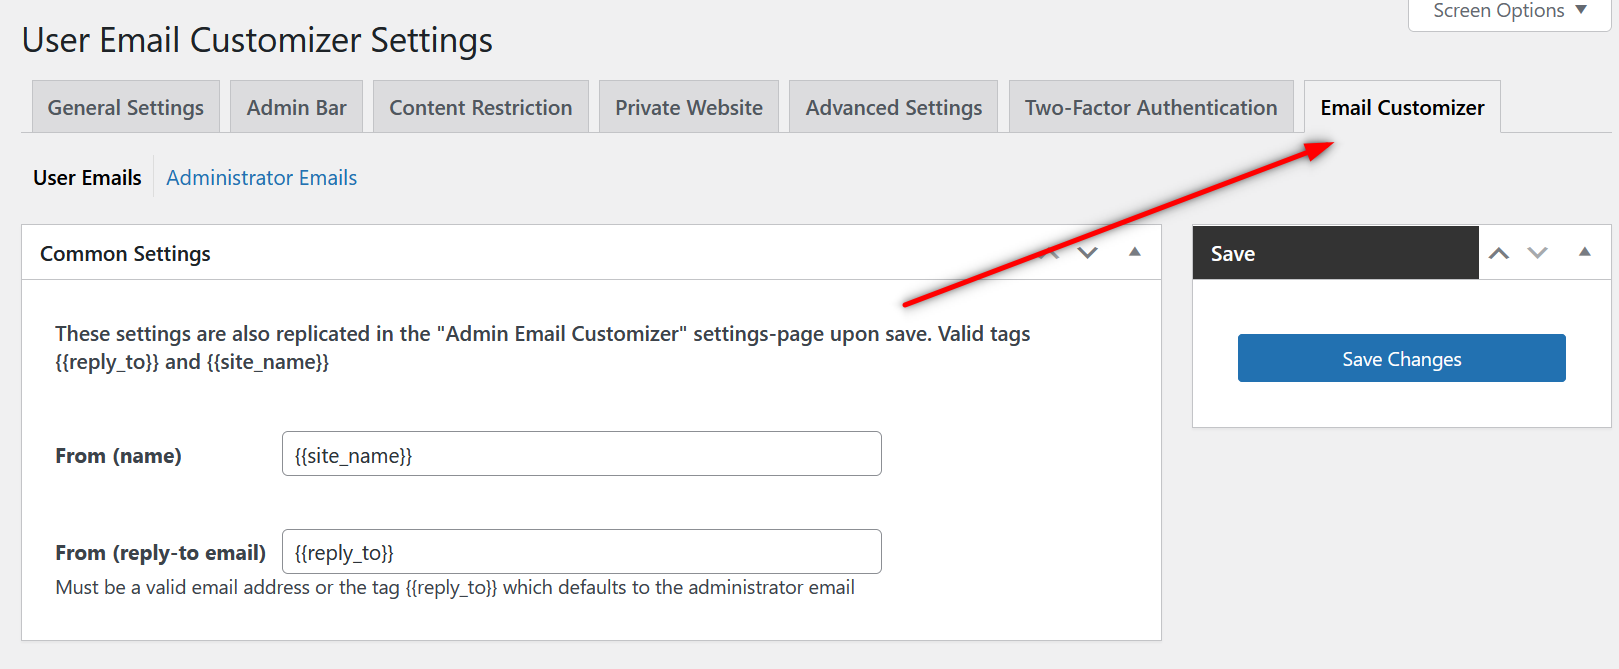 Email Customier shows up under Settings